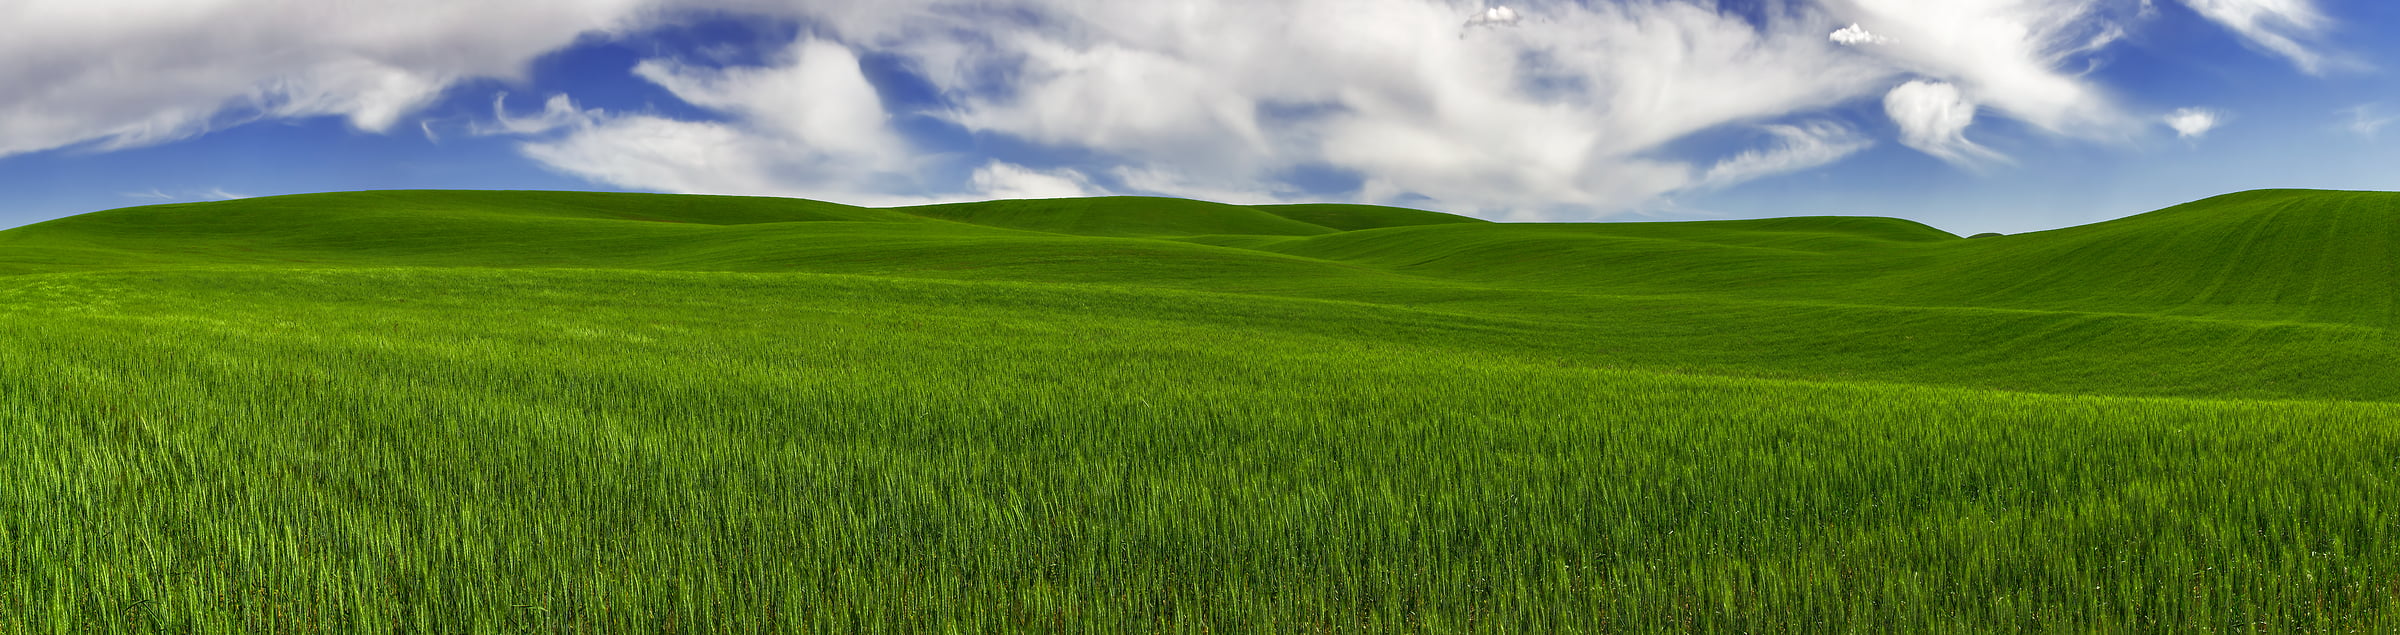 126 megapixels! A very high resolution, large-format VAST photo print of hills and green fields; landscape photograph created by Chris Collacott in Palouse, WA, USA